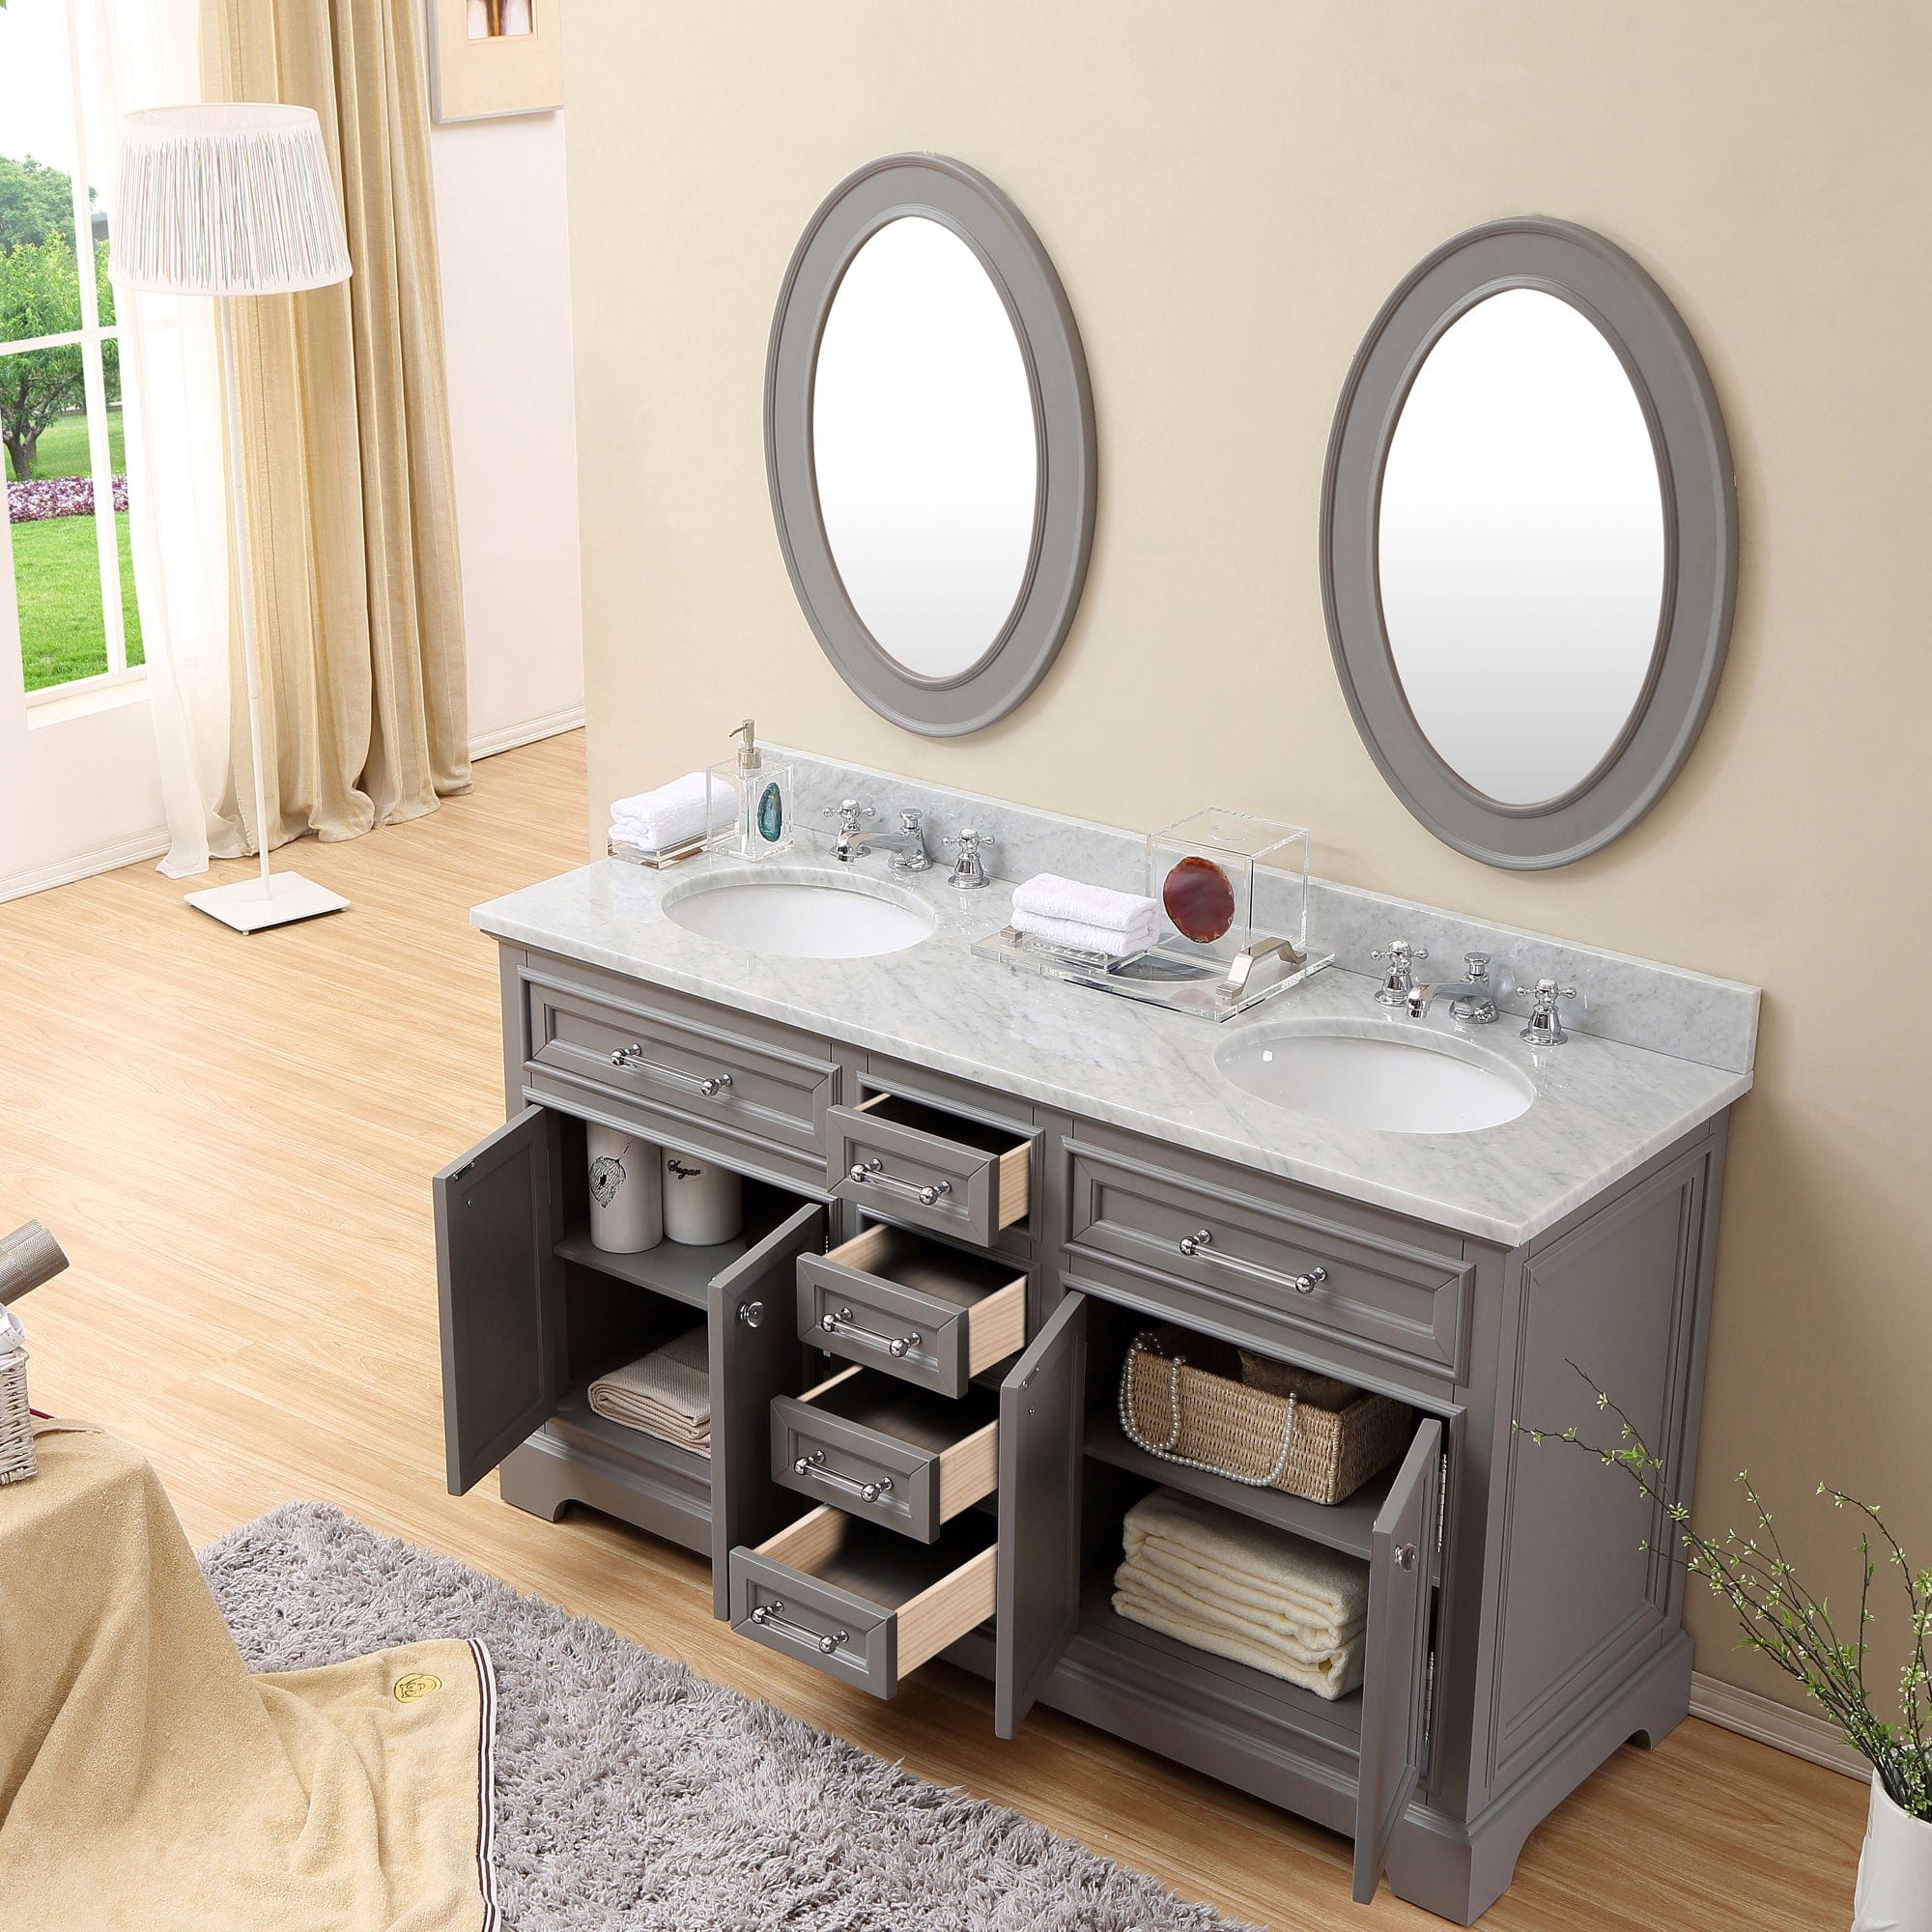 60 Inch Cashmere Grey Double Sink Bathroom Vanity With Matching Framed Mirrors From The Derby Collection - Molaix700621683087DE60CW01CG-O21000000